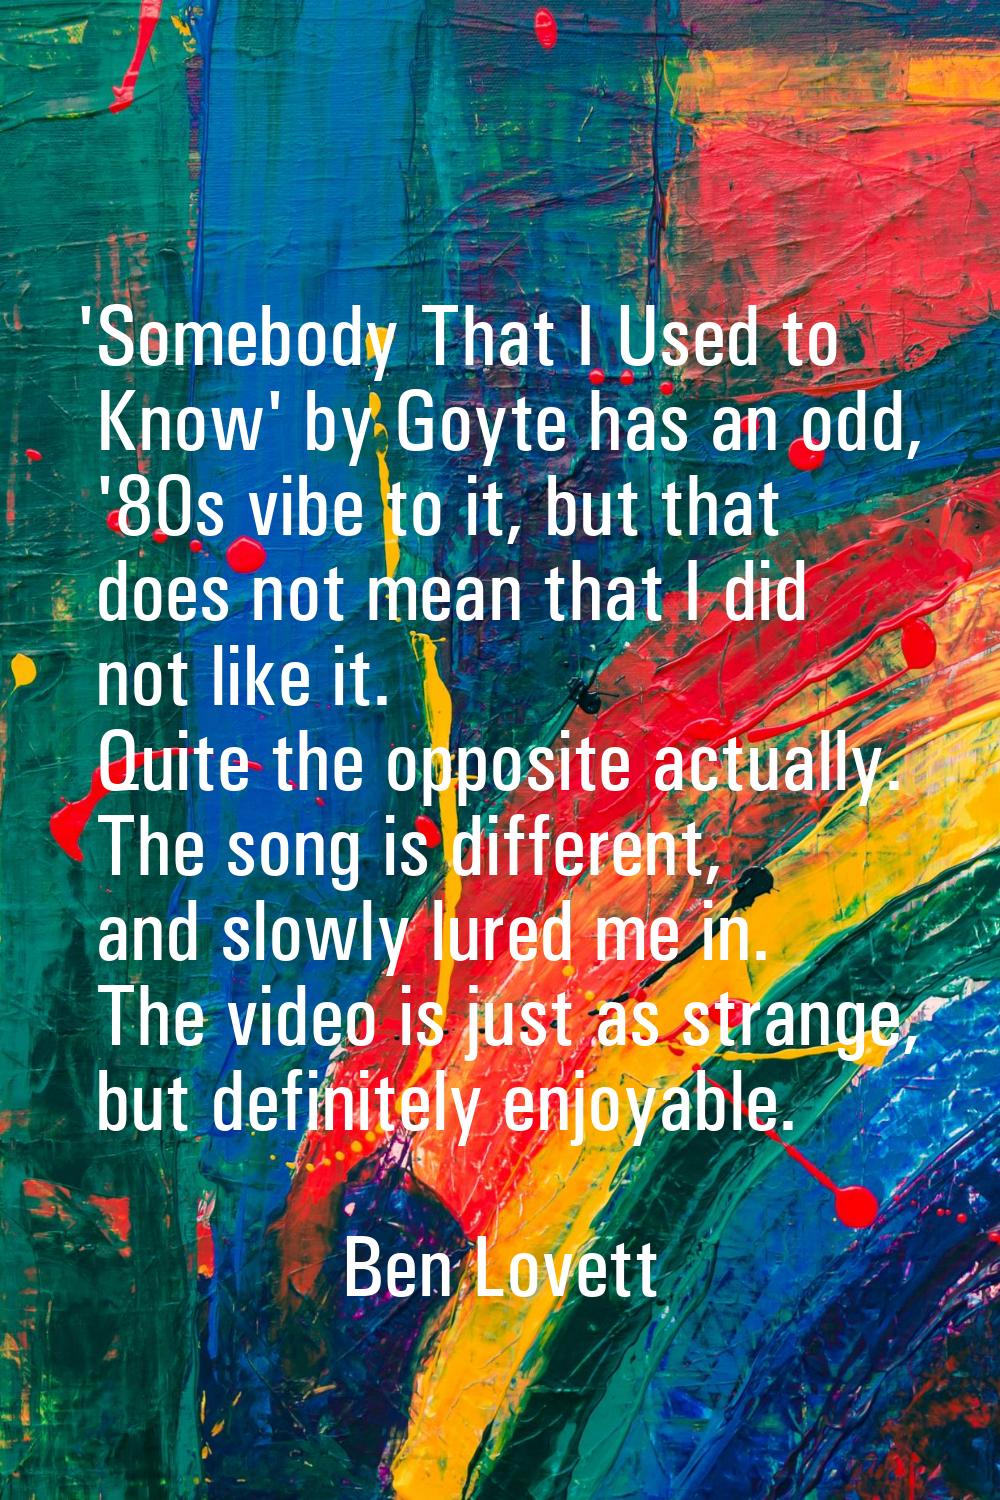 'Somebody That I Used to Know' by Goyte has an odd, '80s vibe to it, but that does not mean that I 